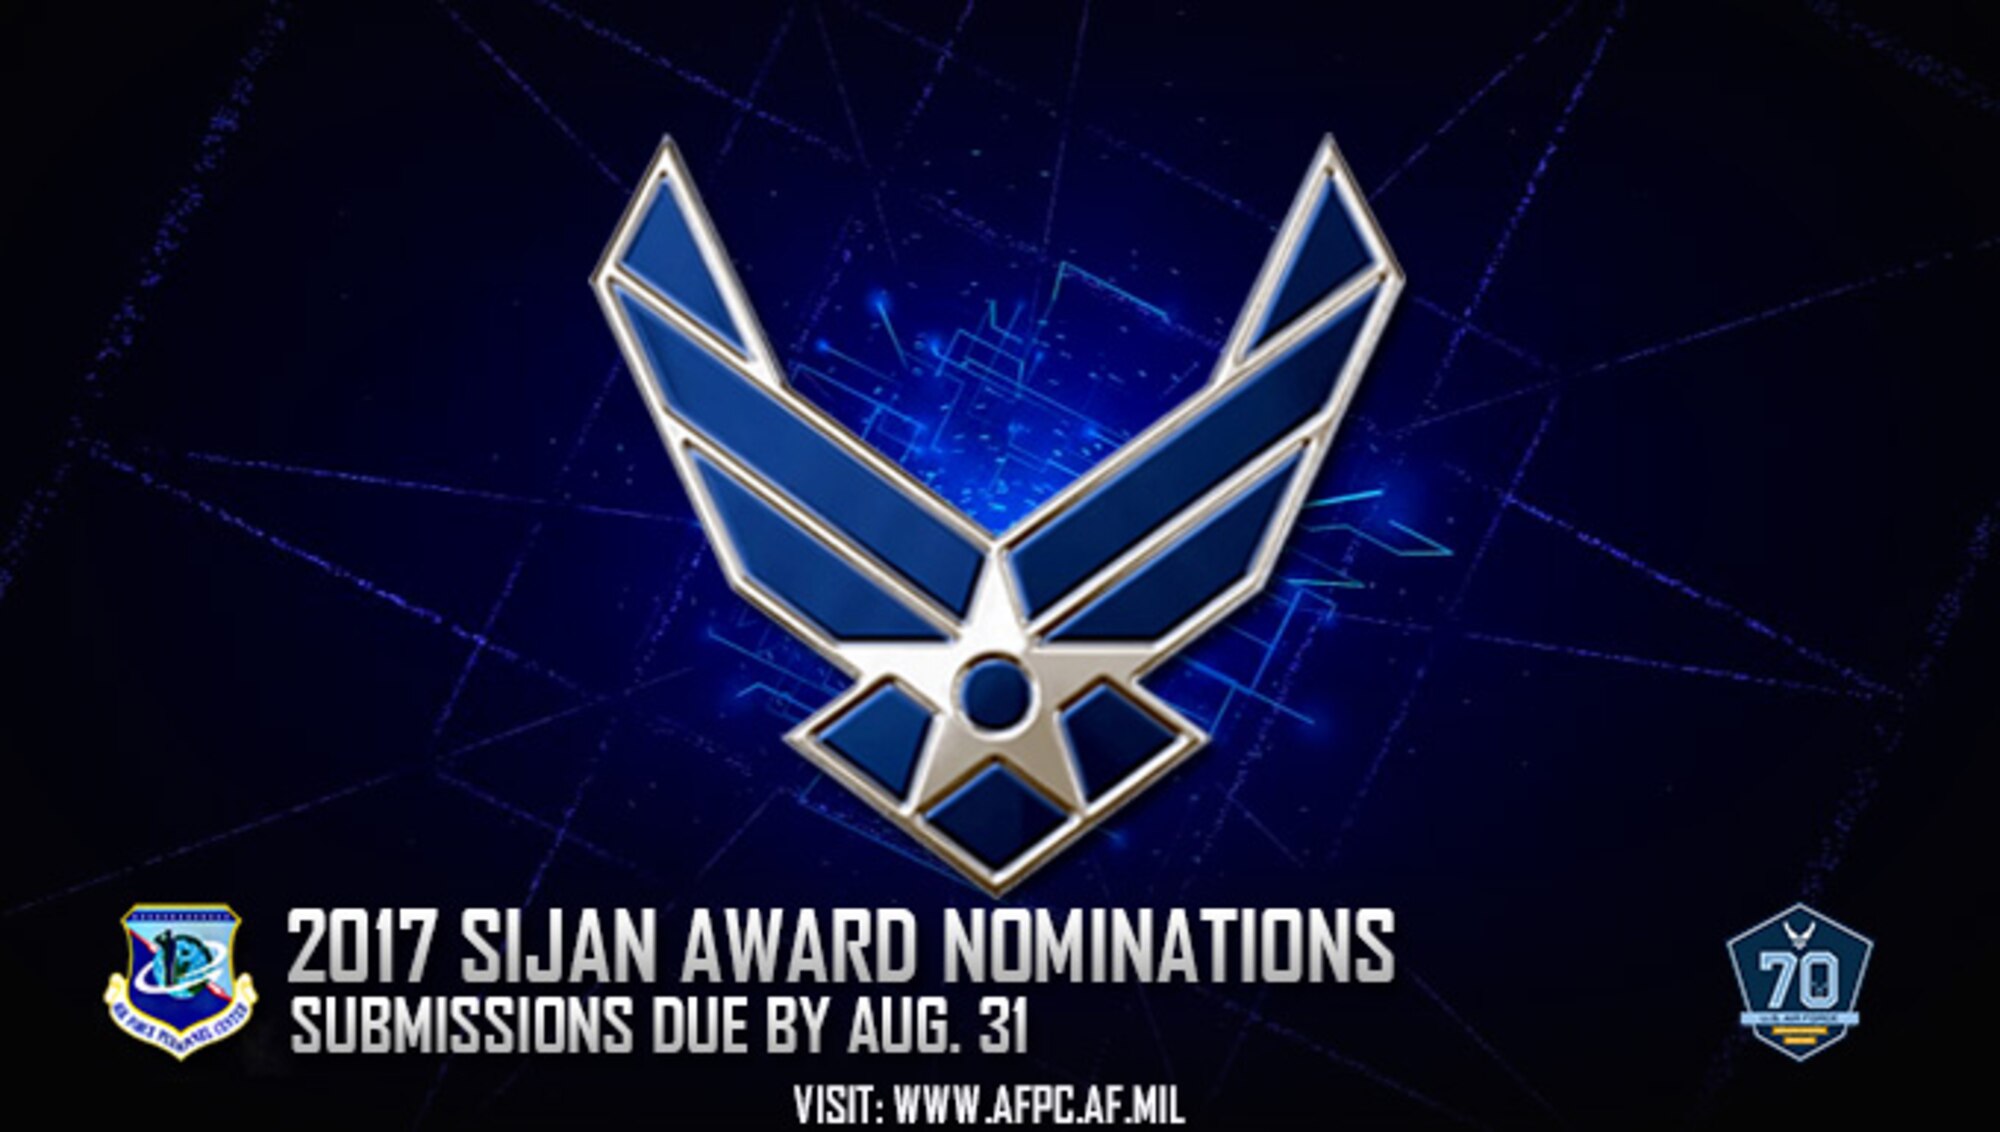 The Air Force is accepting nominations for the 2017 Lance P. Sijan U.S. Air Force Leadership Award. Nominations are due to the Air Force Personnel Center no later than Aug. 31. (U.S. Air Force graphic by Staff Sgt. Alexx Pons)